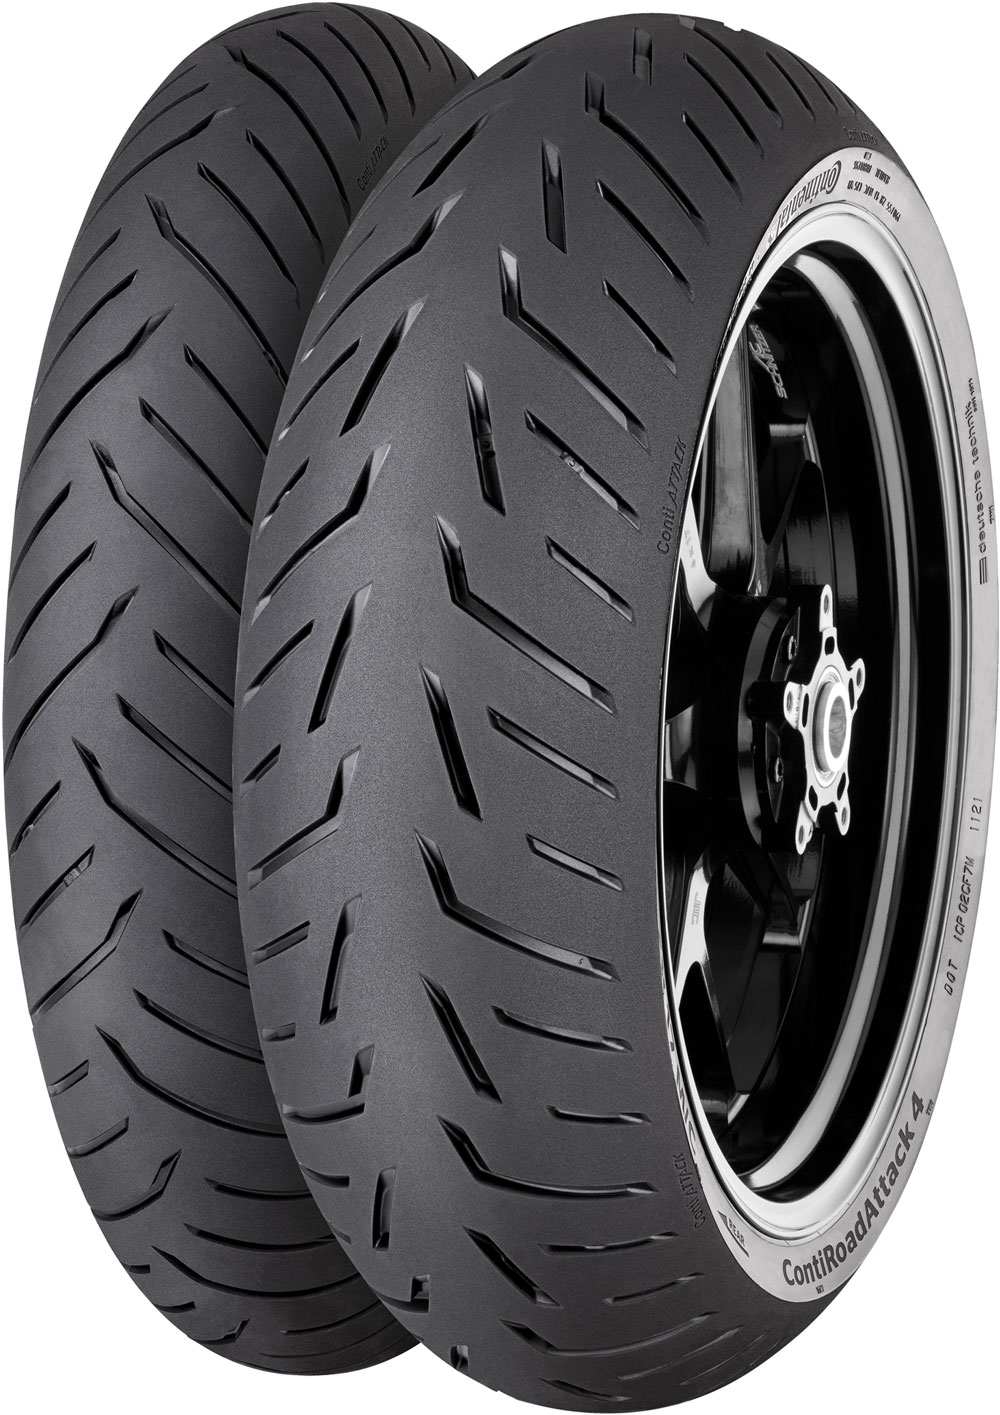 product_type-moto_tires CONTINENTAL RDATTACK4 120/70 R19 60W